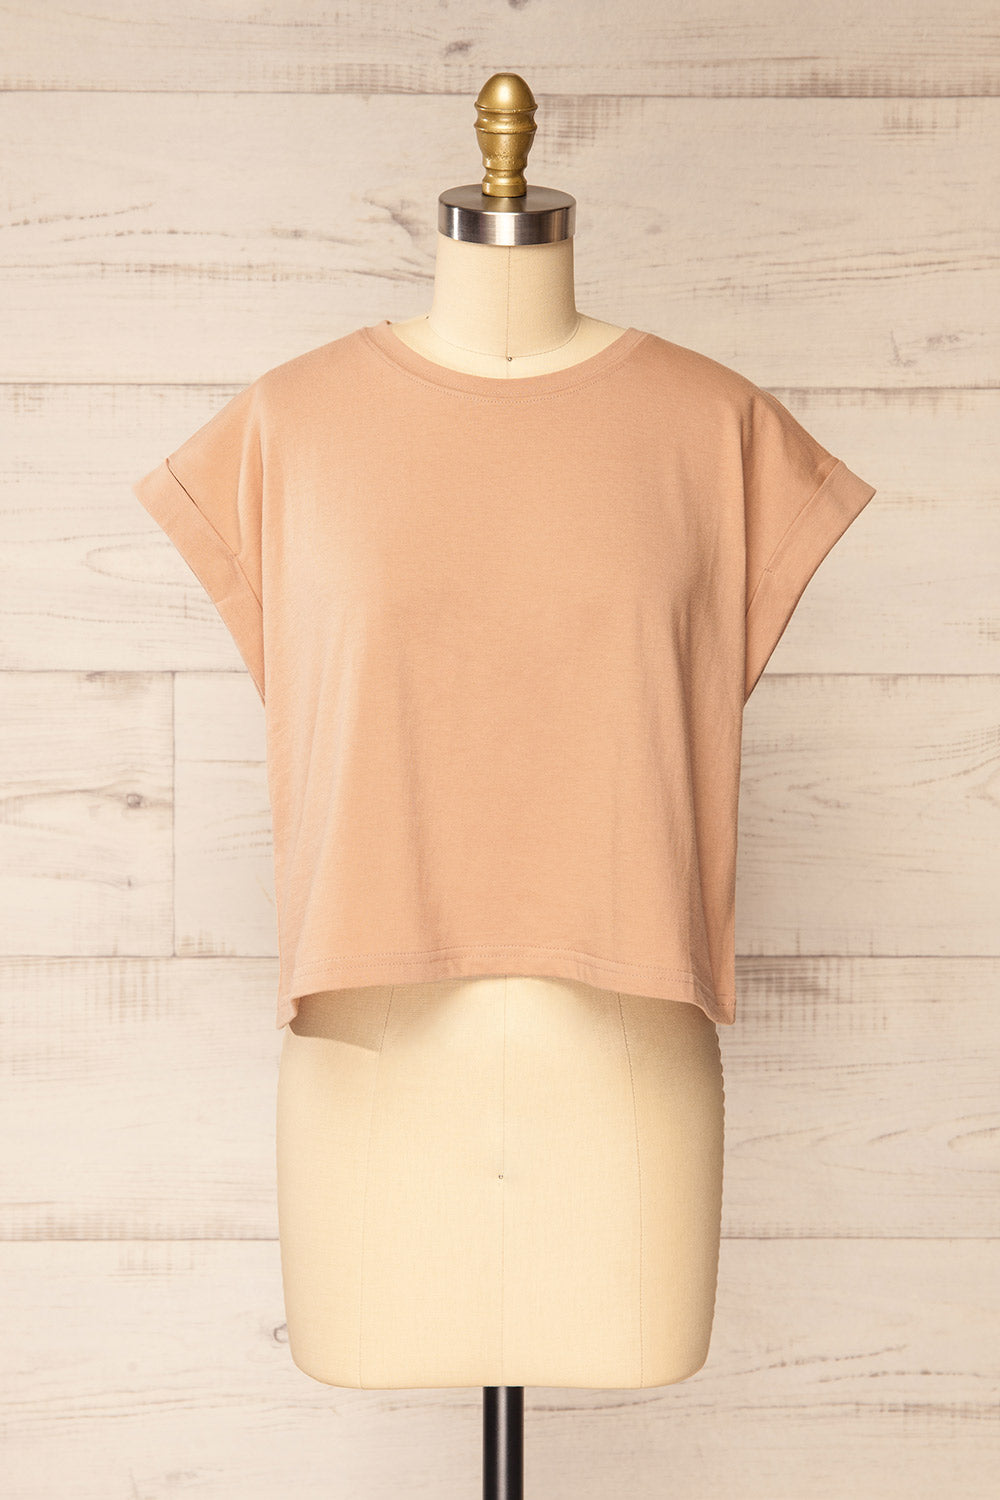 Women's Shirts and Tops | Blouse | Tank Tops | Boutique 1861